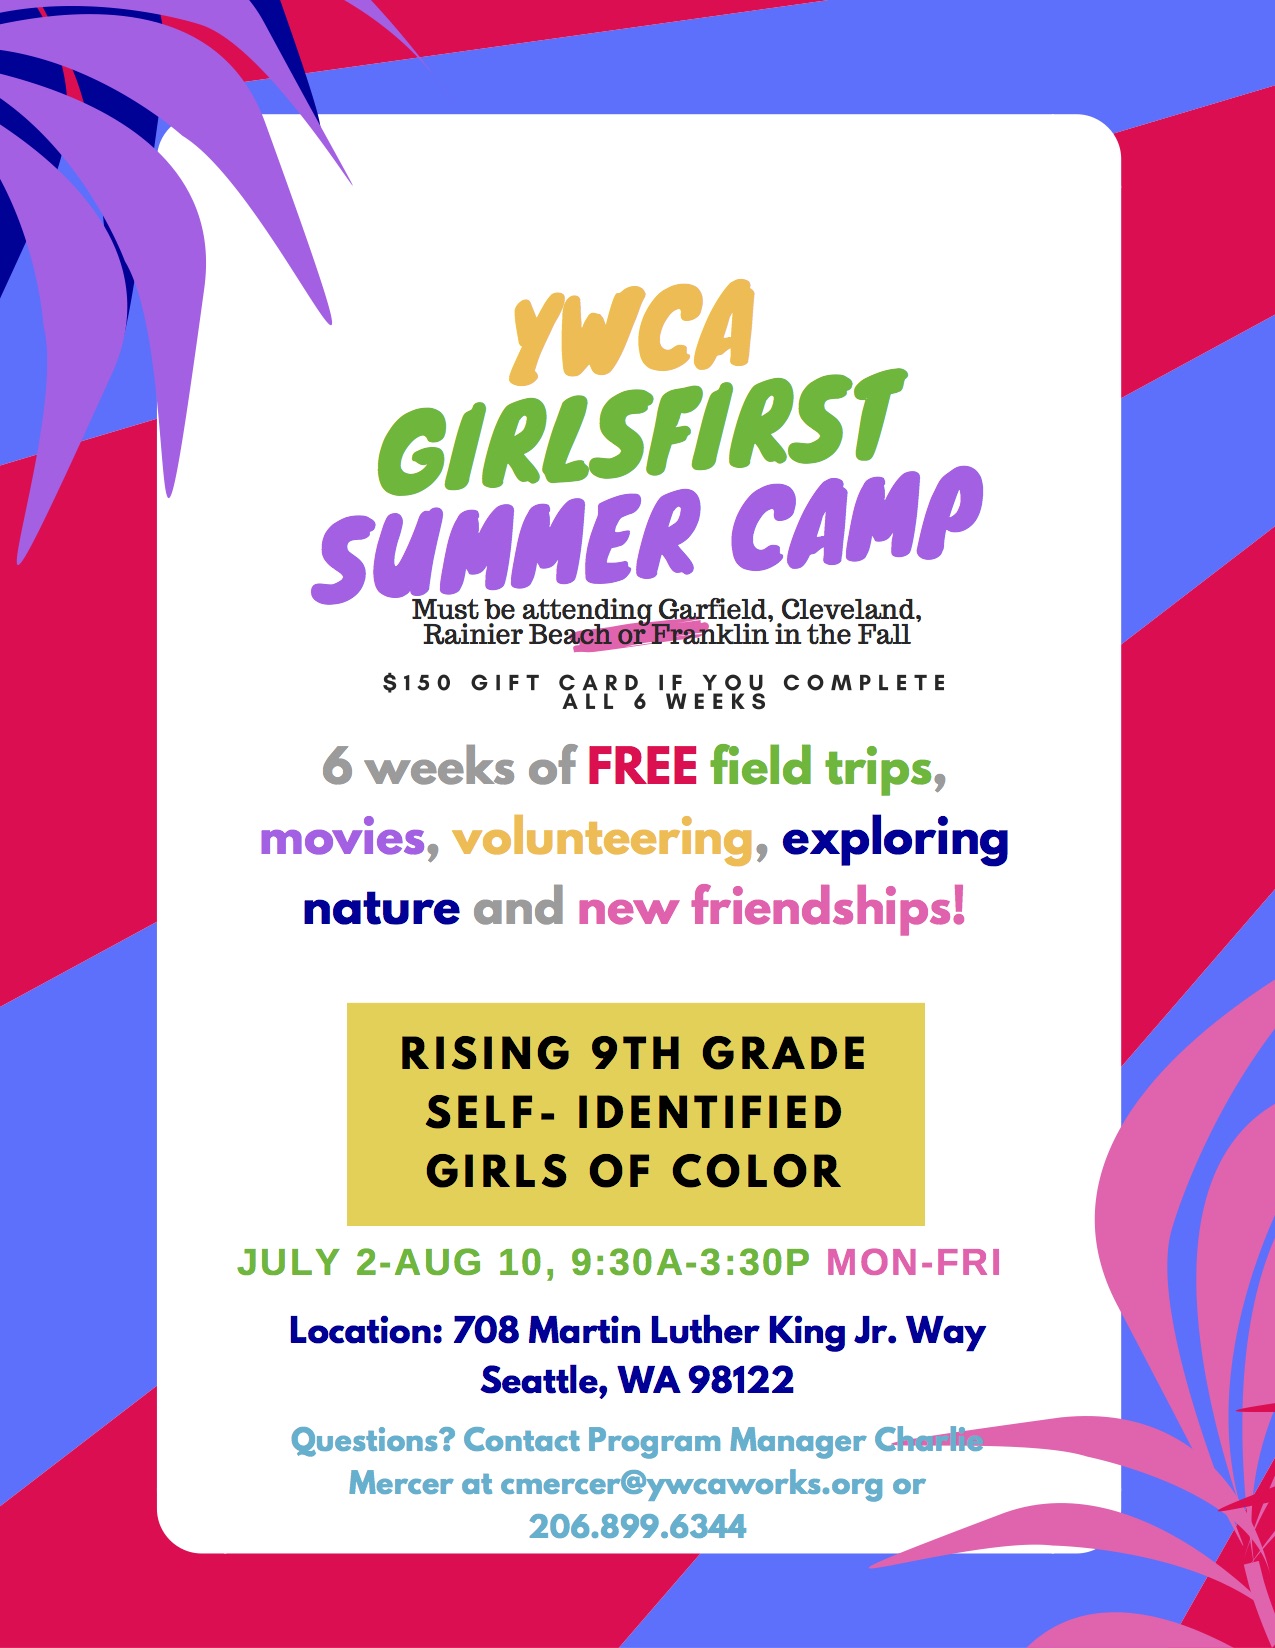 Event details for the YWCA GirlsFirst Summer Camp